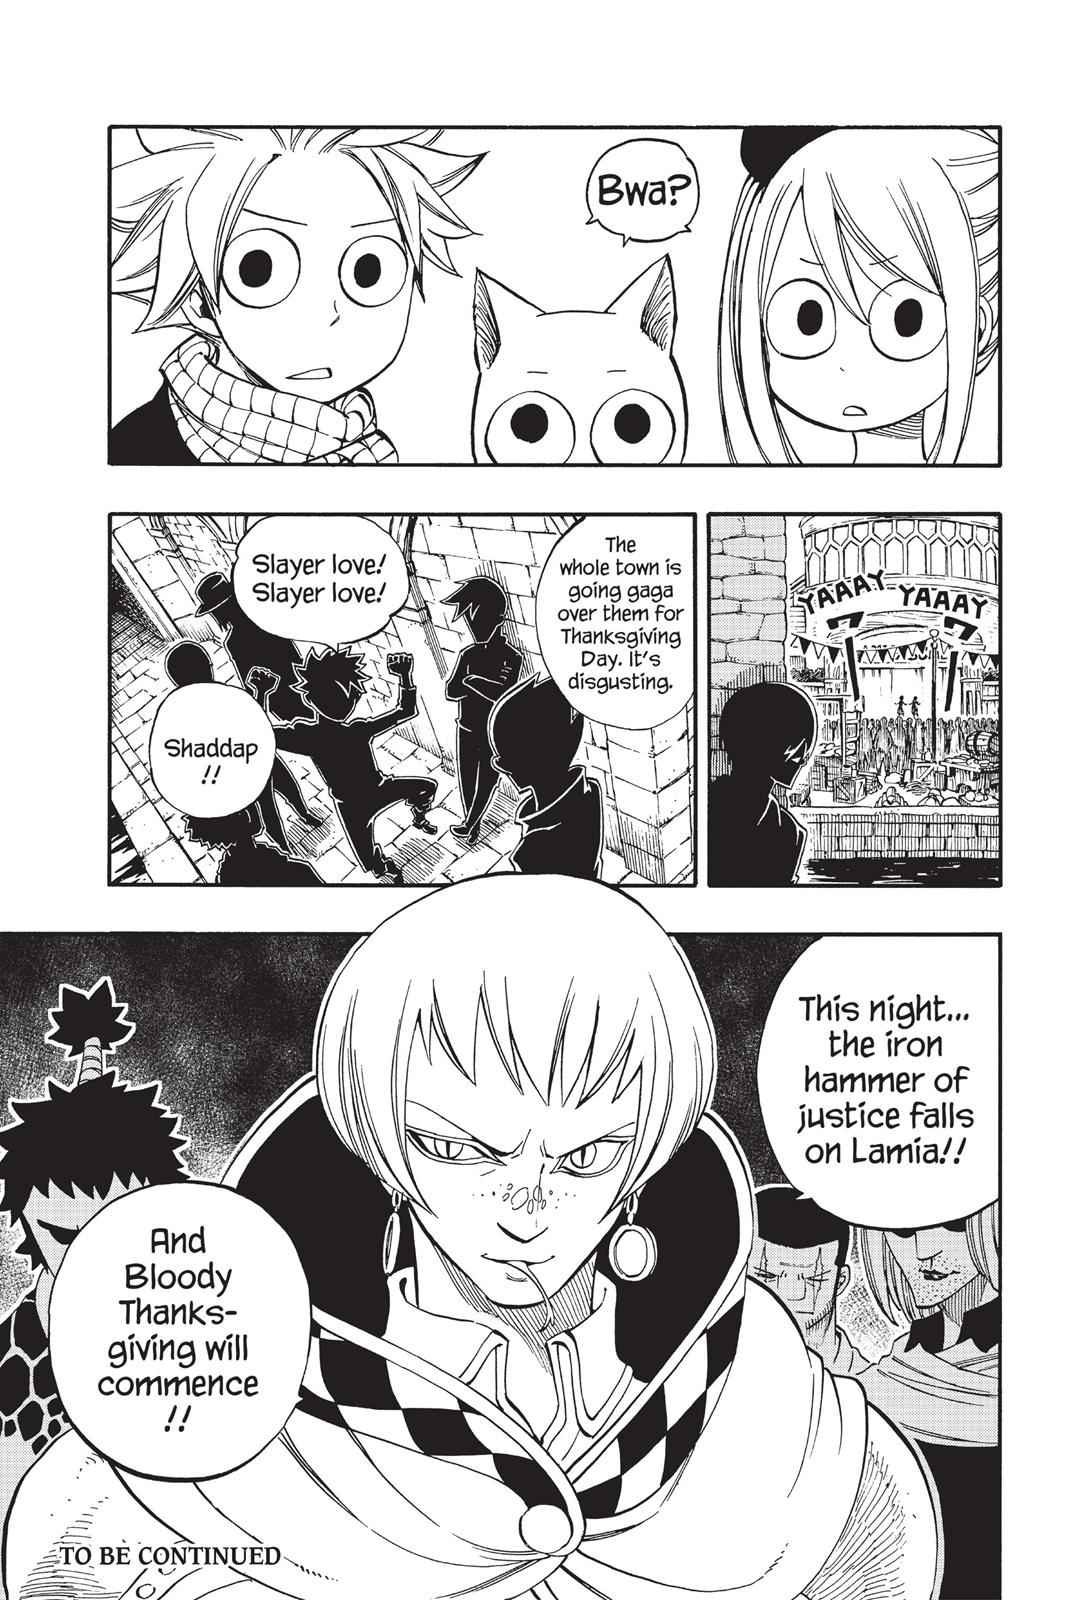  Chapter 420 image 018